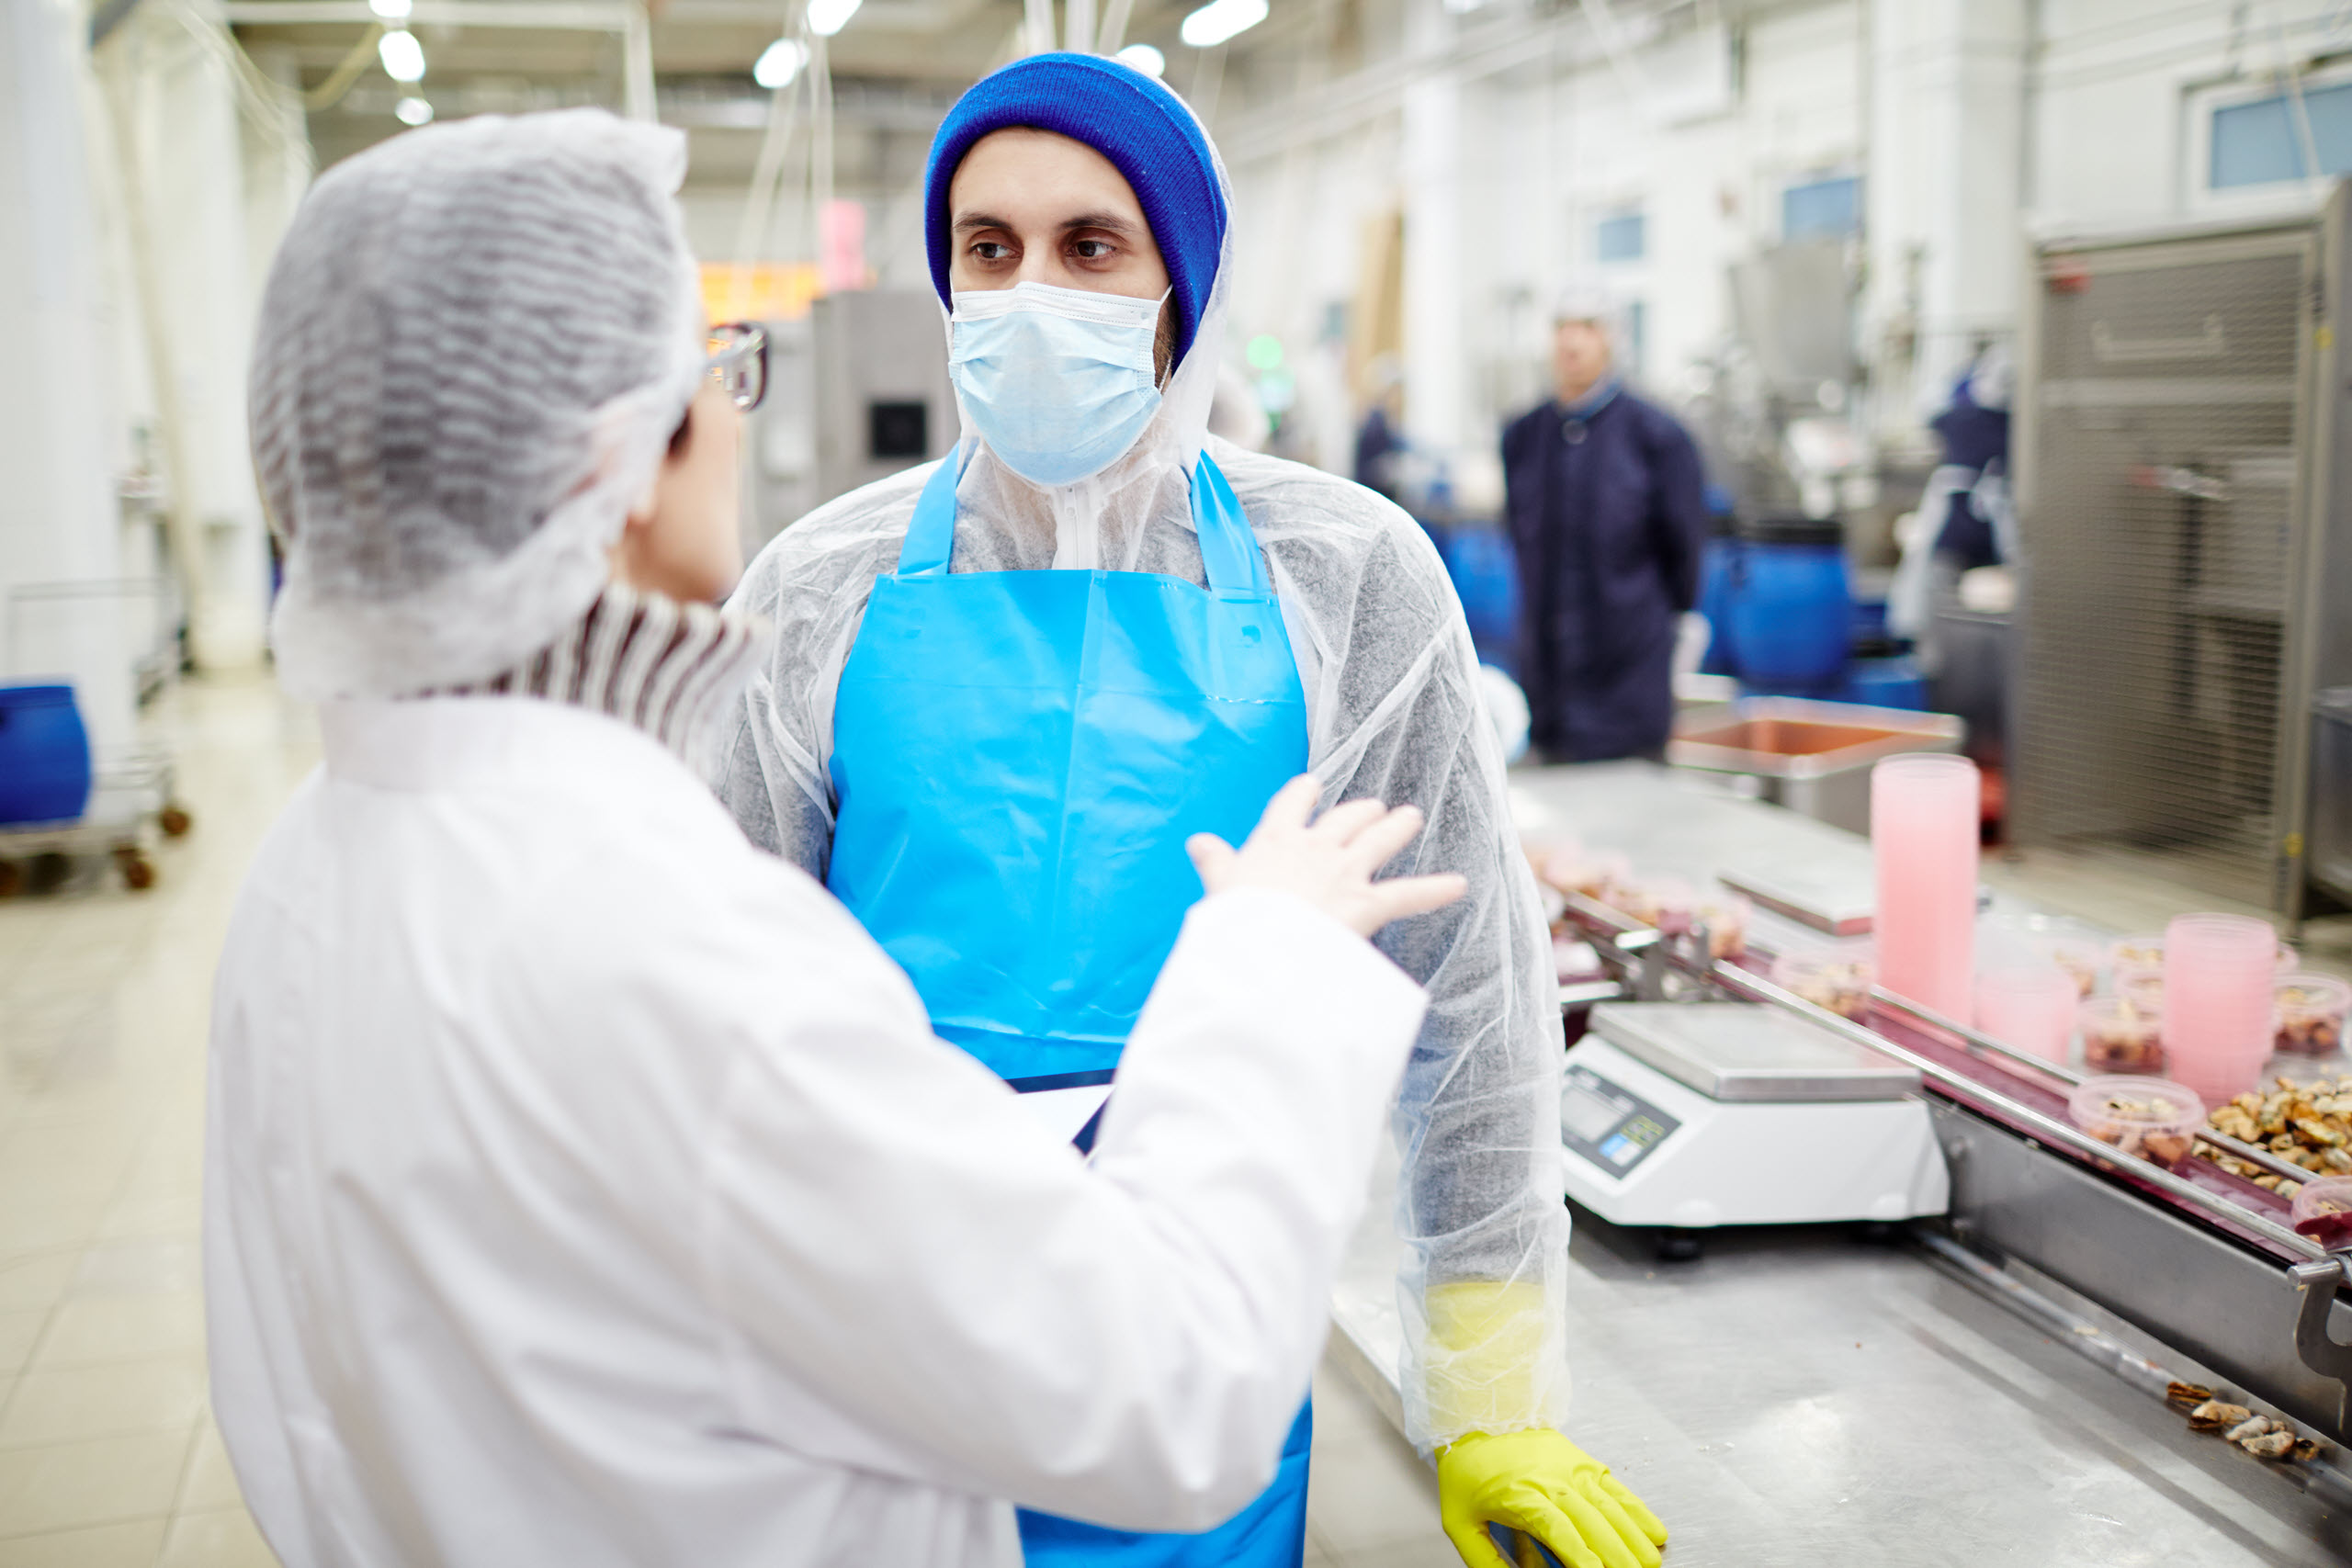 Man and woman engaged in a discussion about food quality in a food processing plant, representing the "Cost Reduction Strategies for Food Processing" course, focused on optimizing processes and reducing costs while upholding food safety and quality standards.